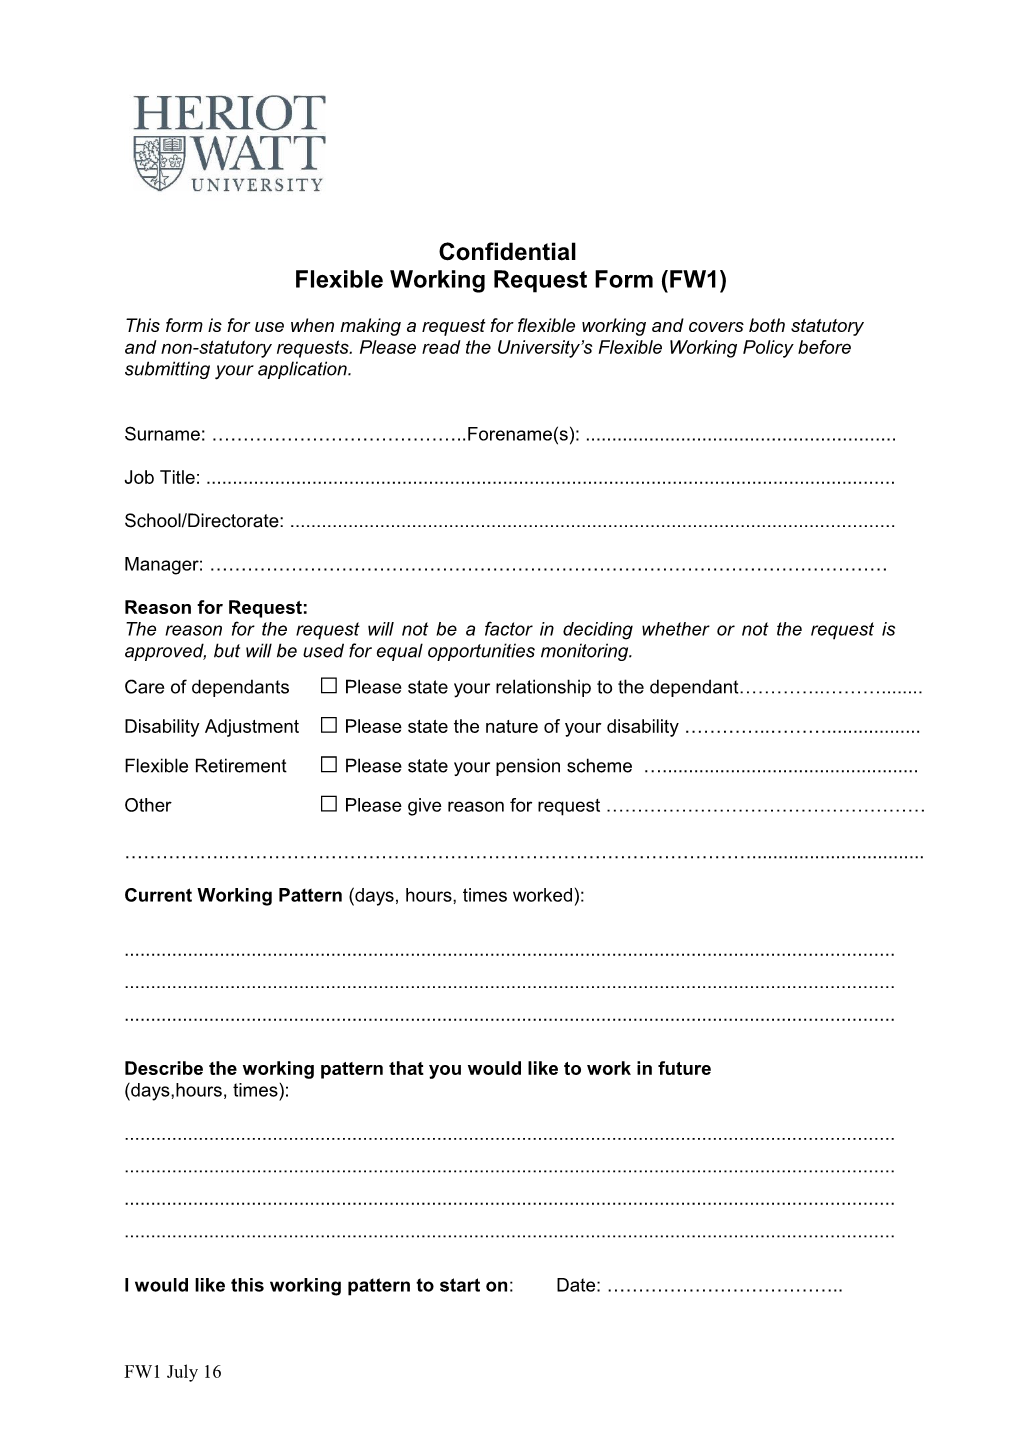 Flexible Working Request Form(FW1)